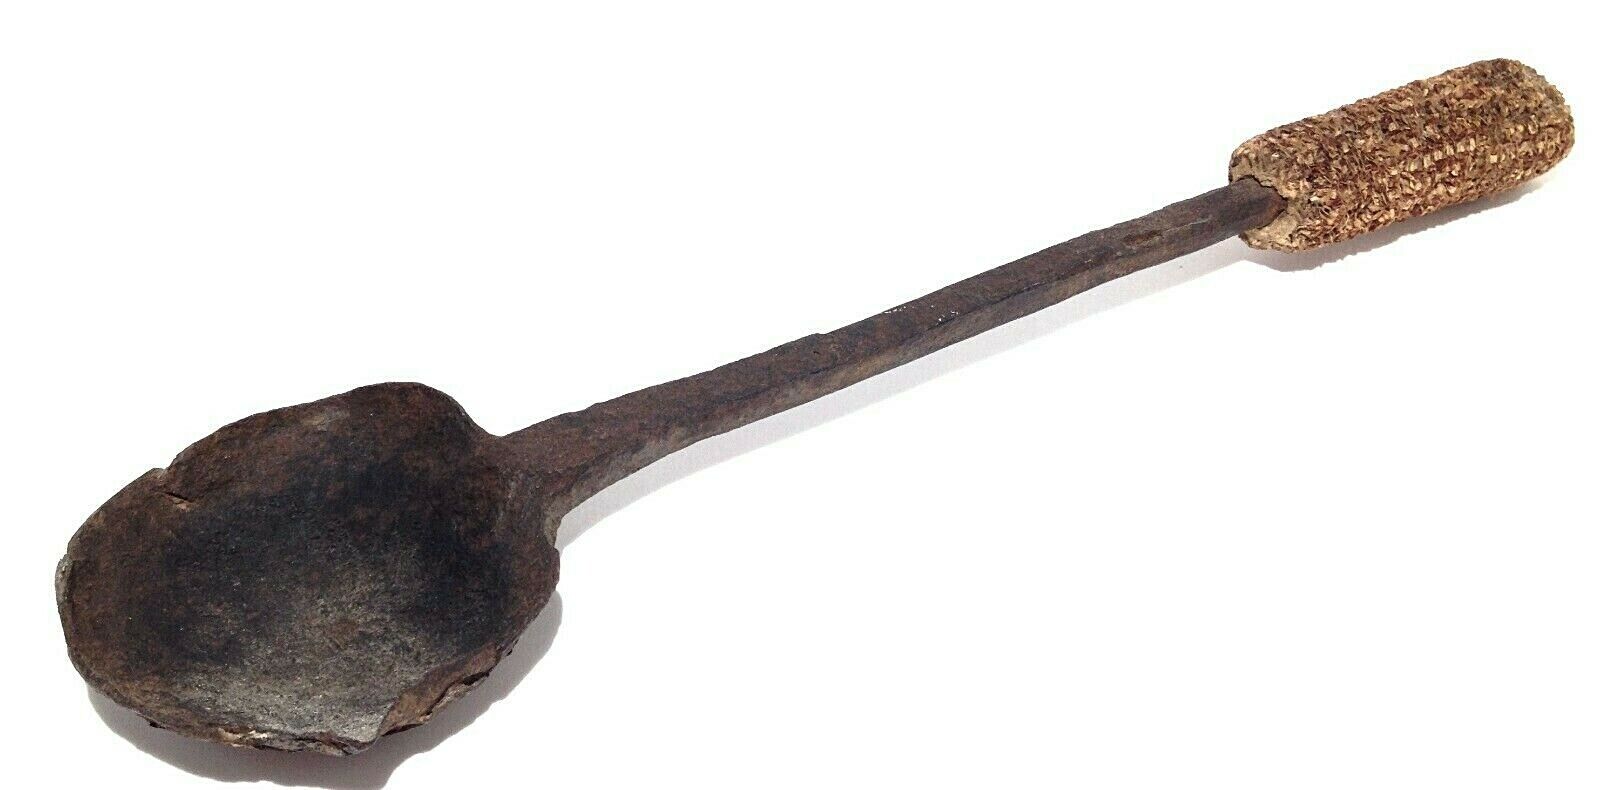 Circa 18th/19th cent. Hand Wrought Musket Ball Smelting Spoon Ladle 